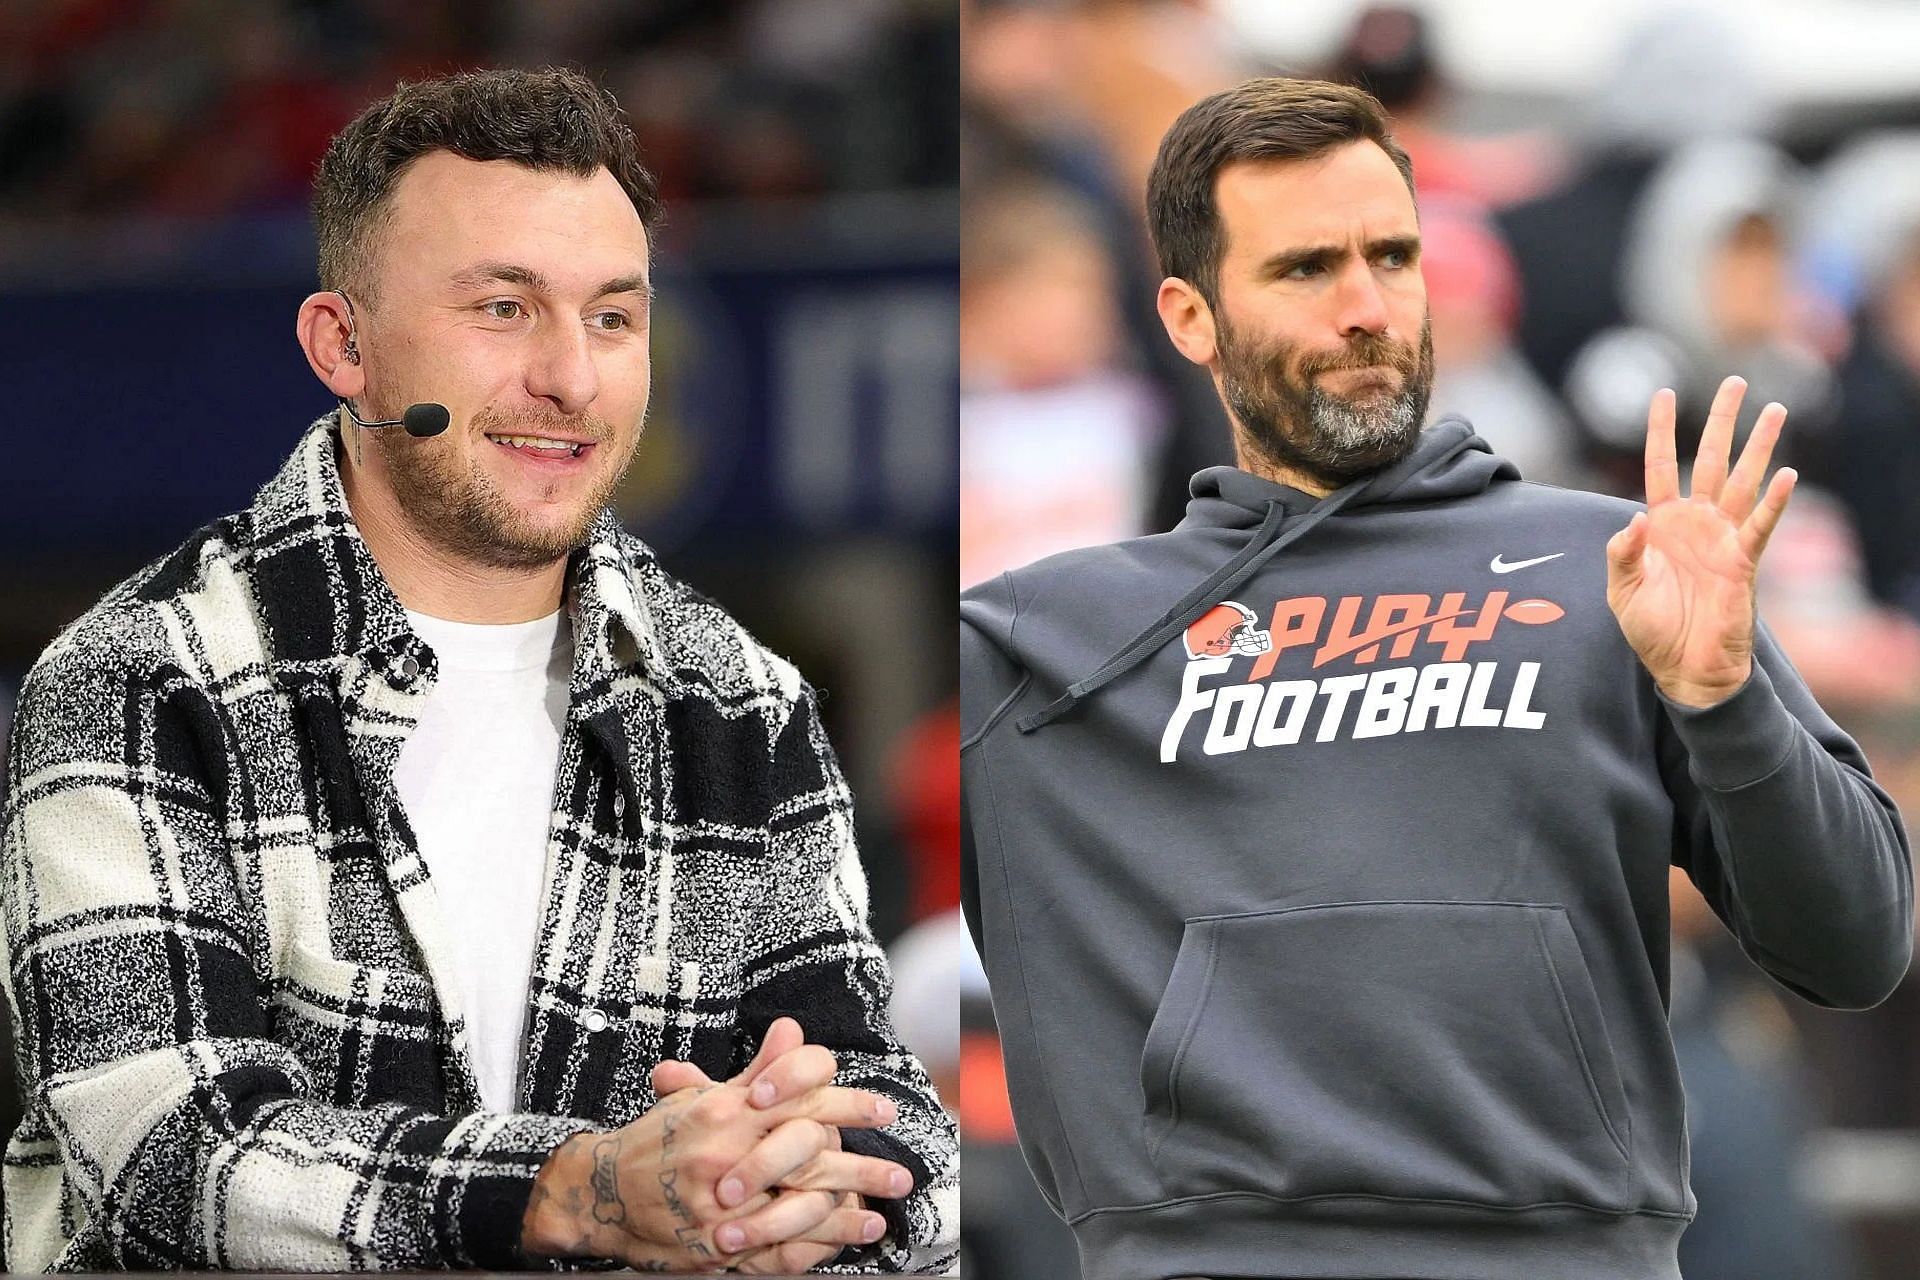 Johnny Manziel comes up with hilarious response after Joe Flacco edges closer to surpassing ex-Browns QB